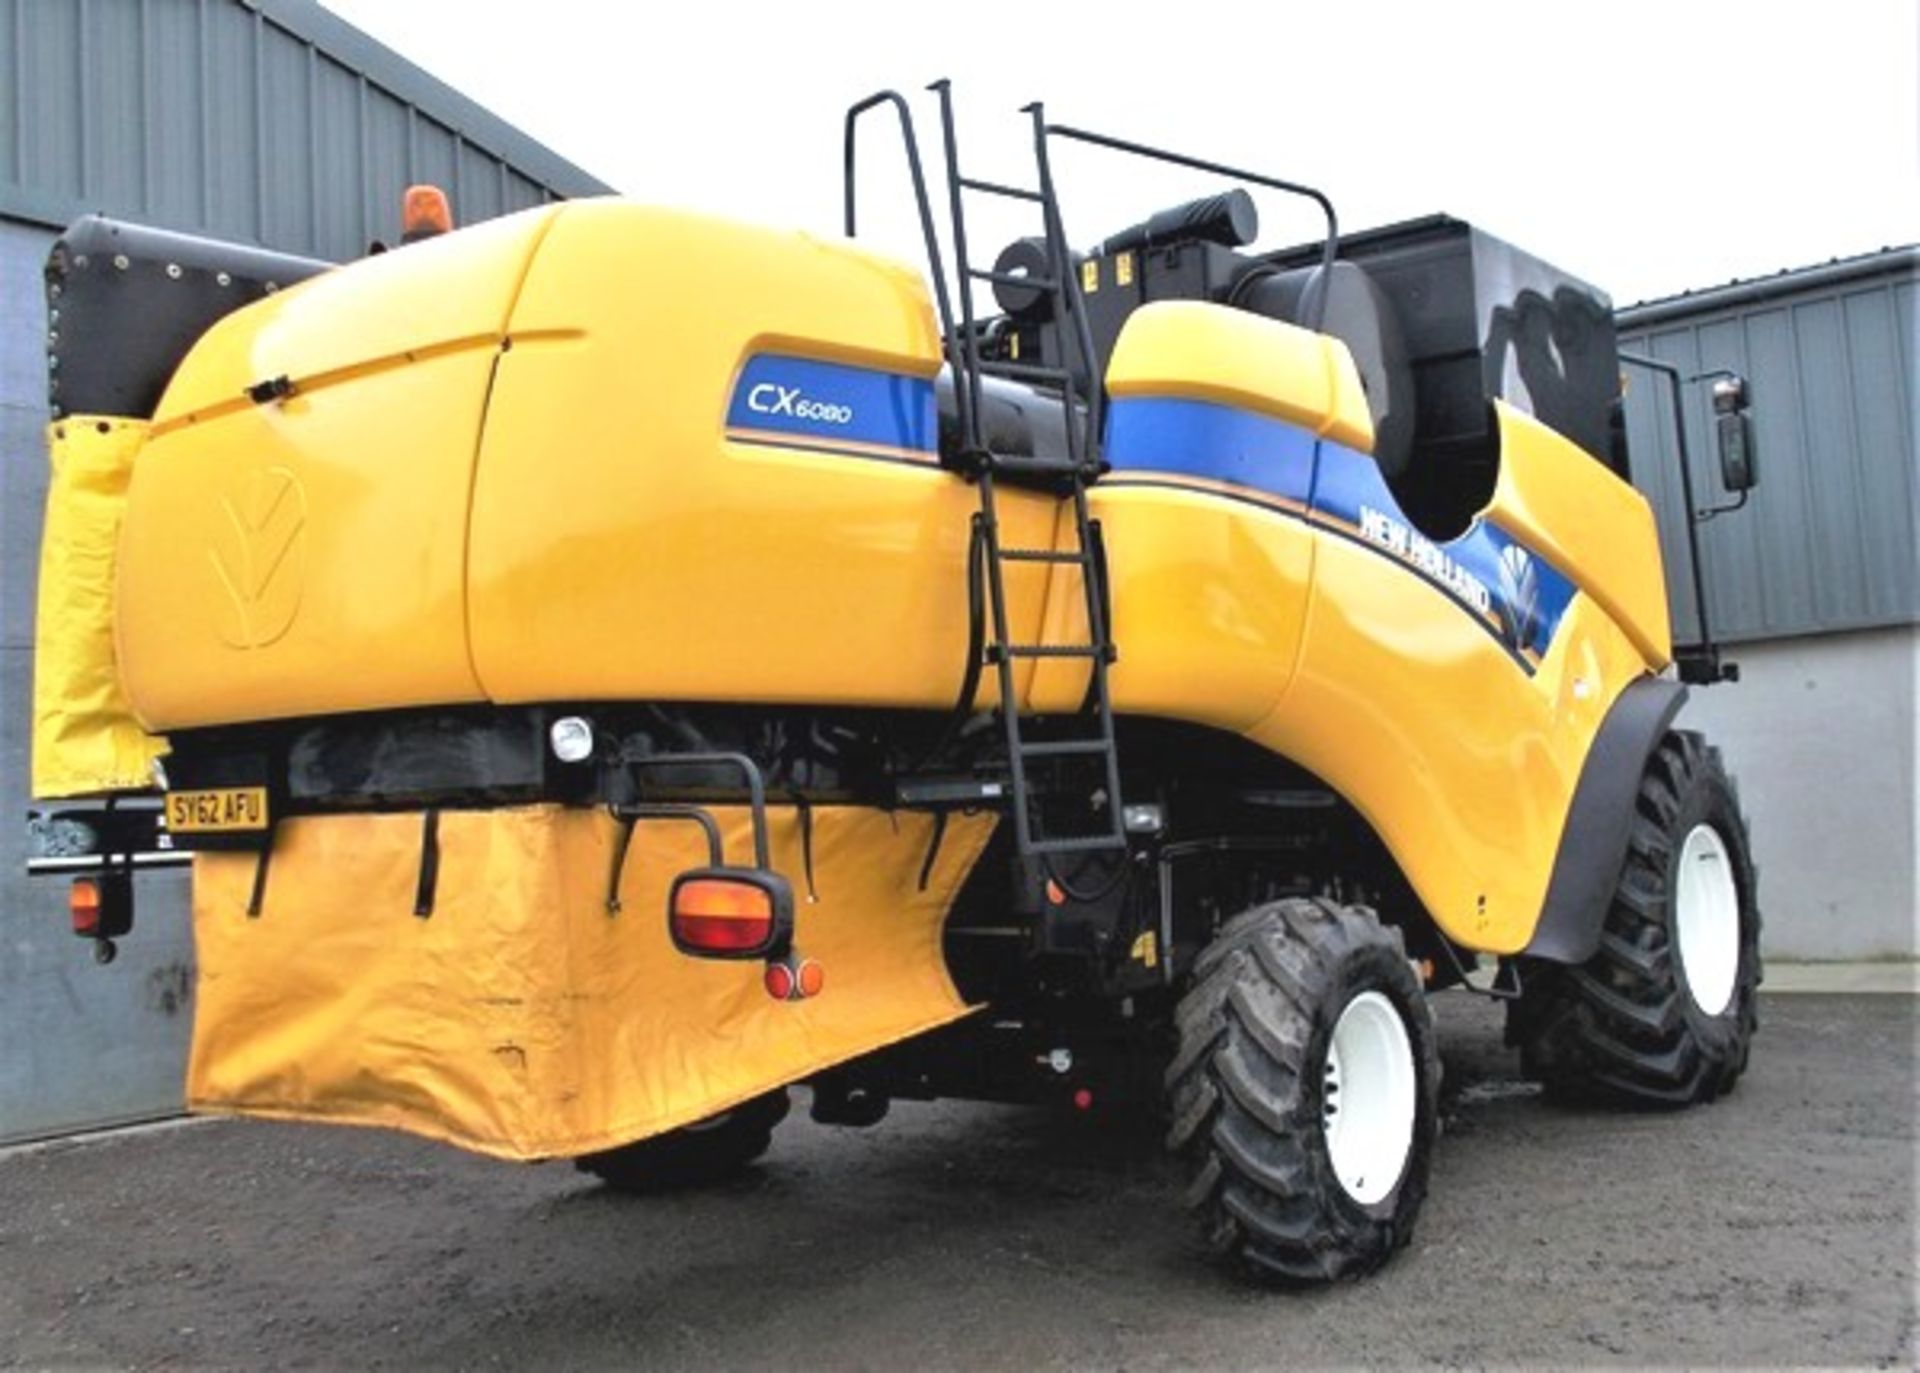 2012 NEW HOLLAND CX6080 4WD, smart sieves, 20ft vario header, moisture meater, yield meter, under 10 - Image 10 of 16